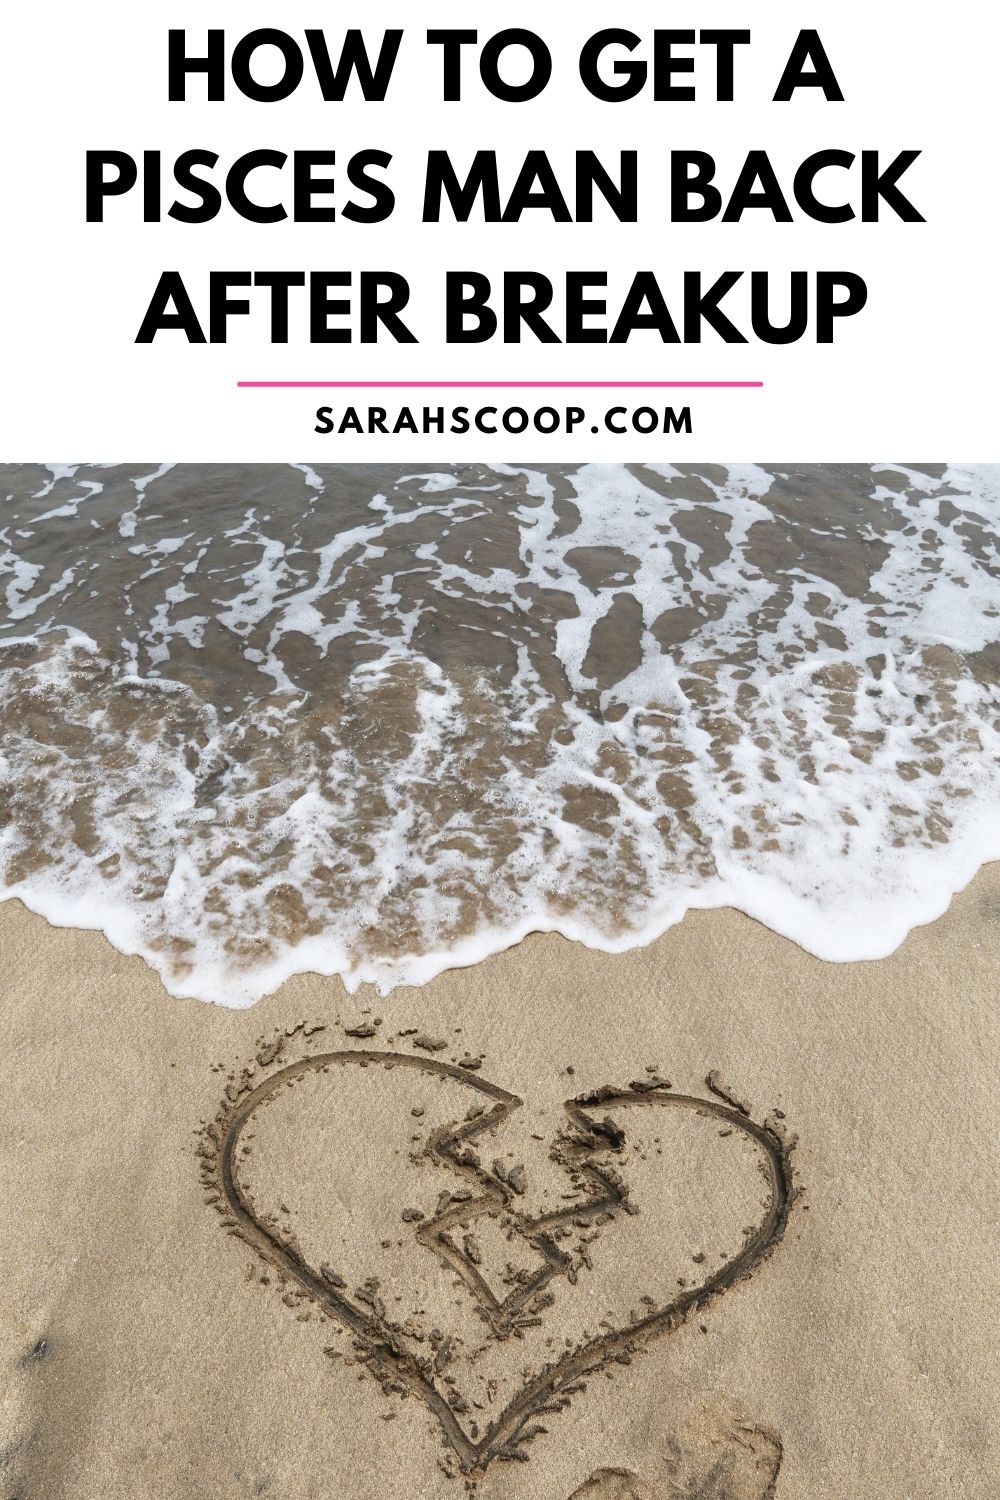 35 Ways On How To Get A Pisces Man Back After Breakup - Sarah Scoop